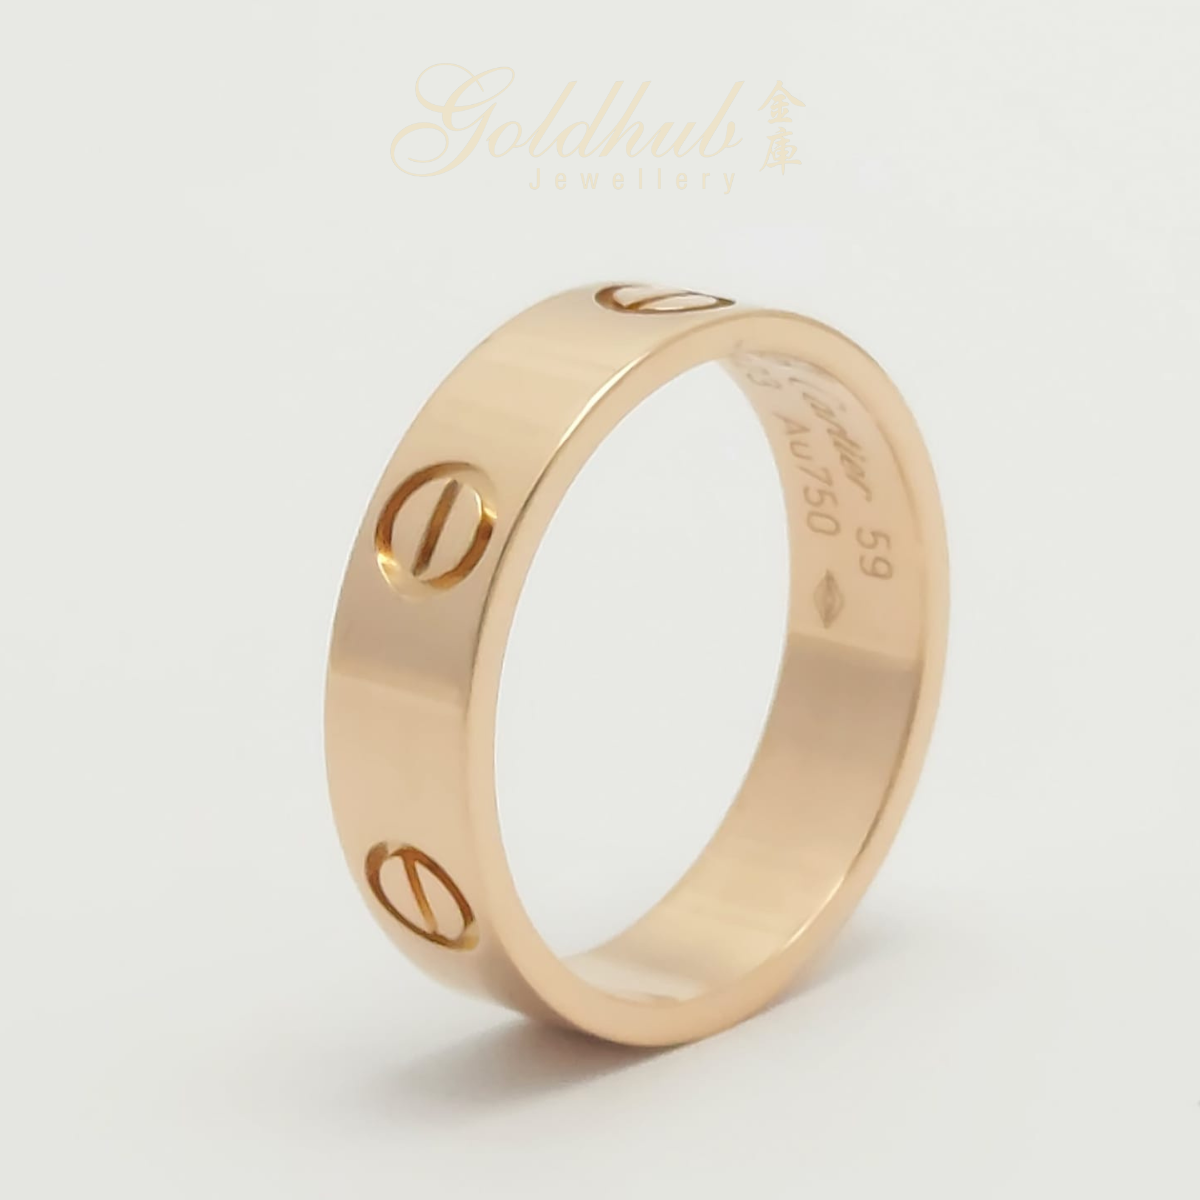 [RELOCATION SALES] 18k Pre-loved Cartier Love Ring in Rose Gold